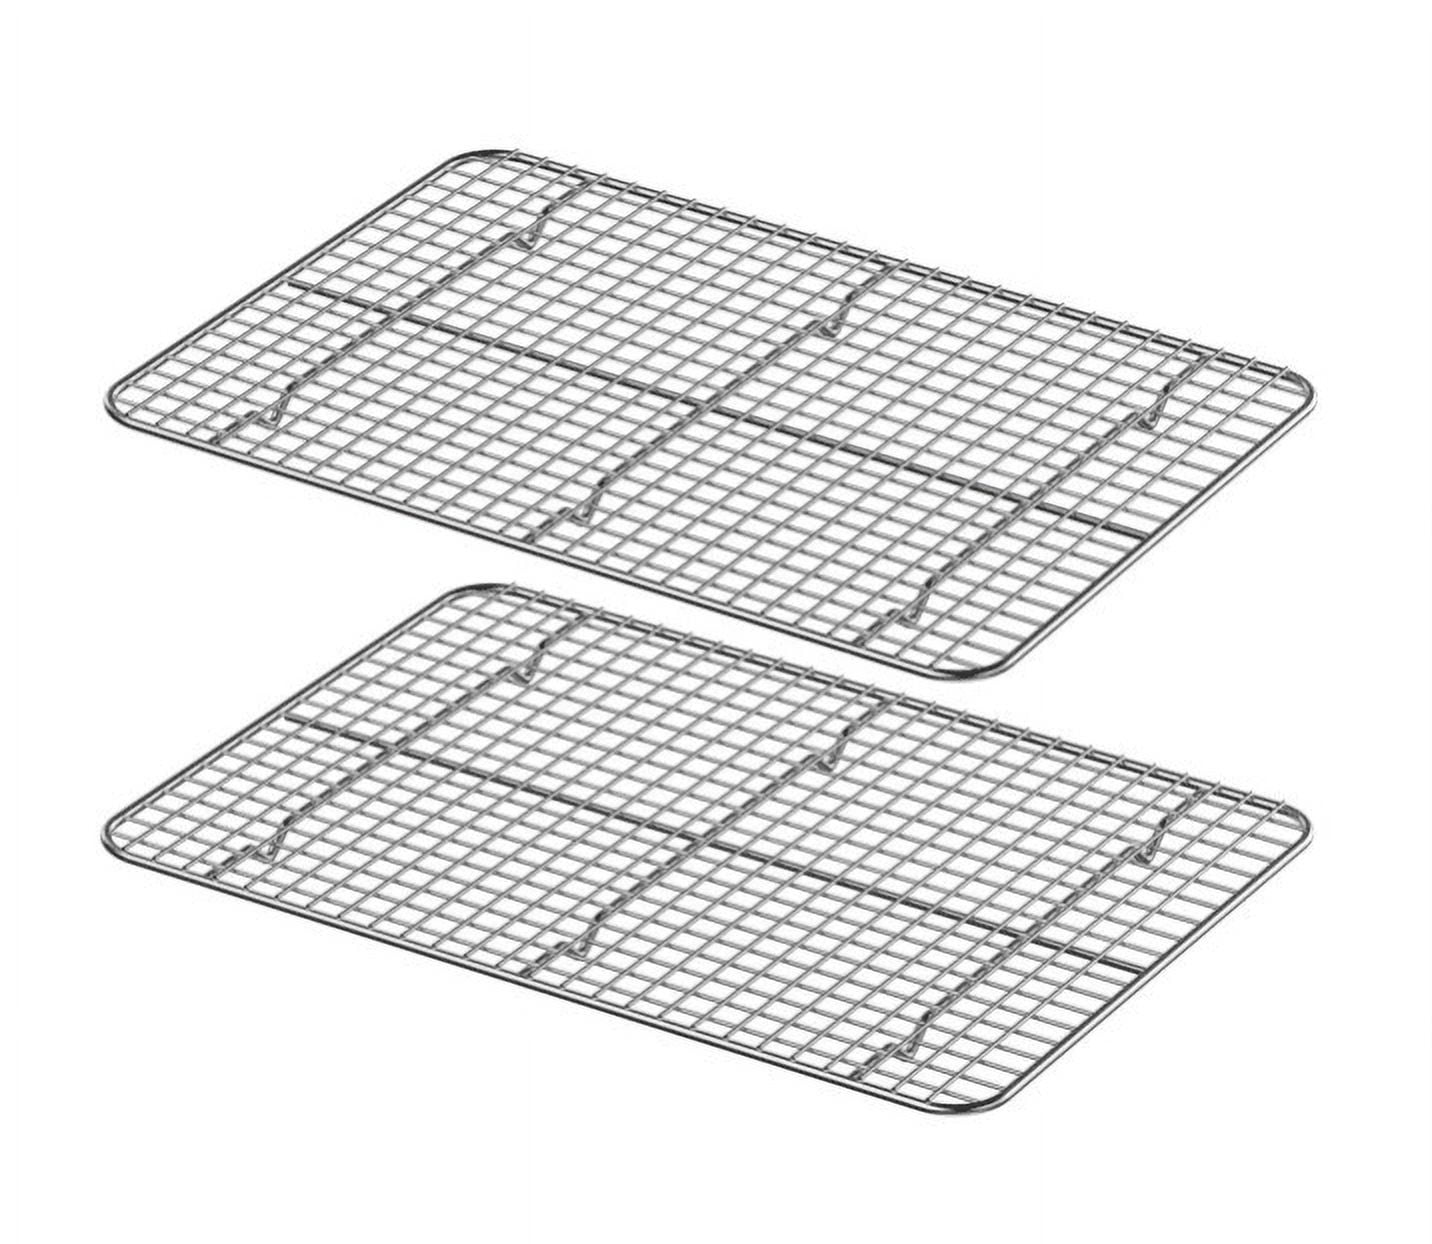 Mini Cooling Rack Set of 2, Topboutique Stainless Steel Small Grill Wire Rack for Oven Roasting Baking Cooking, 22x16x1.5CM Fit Toaster Oven Tray for